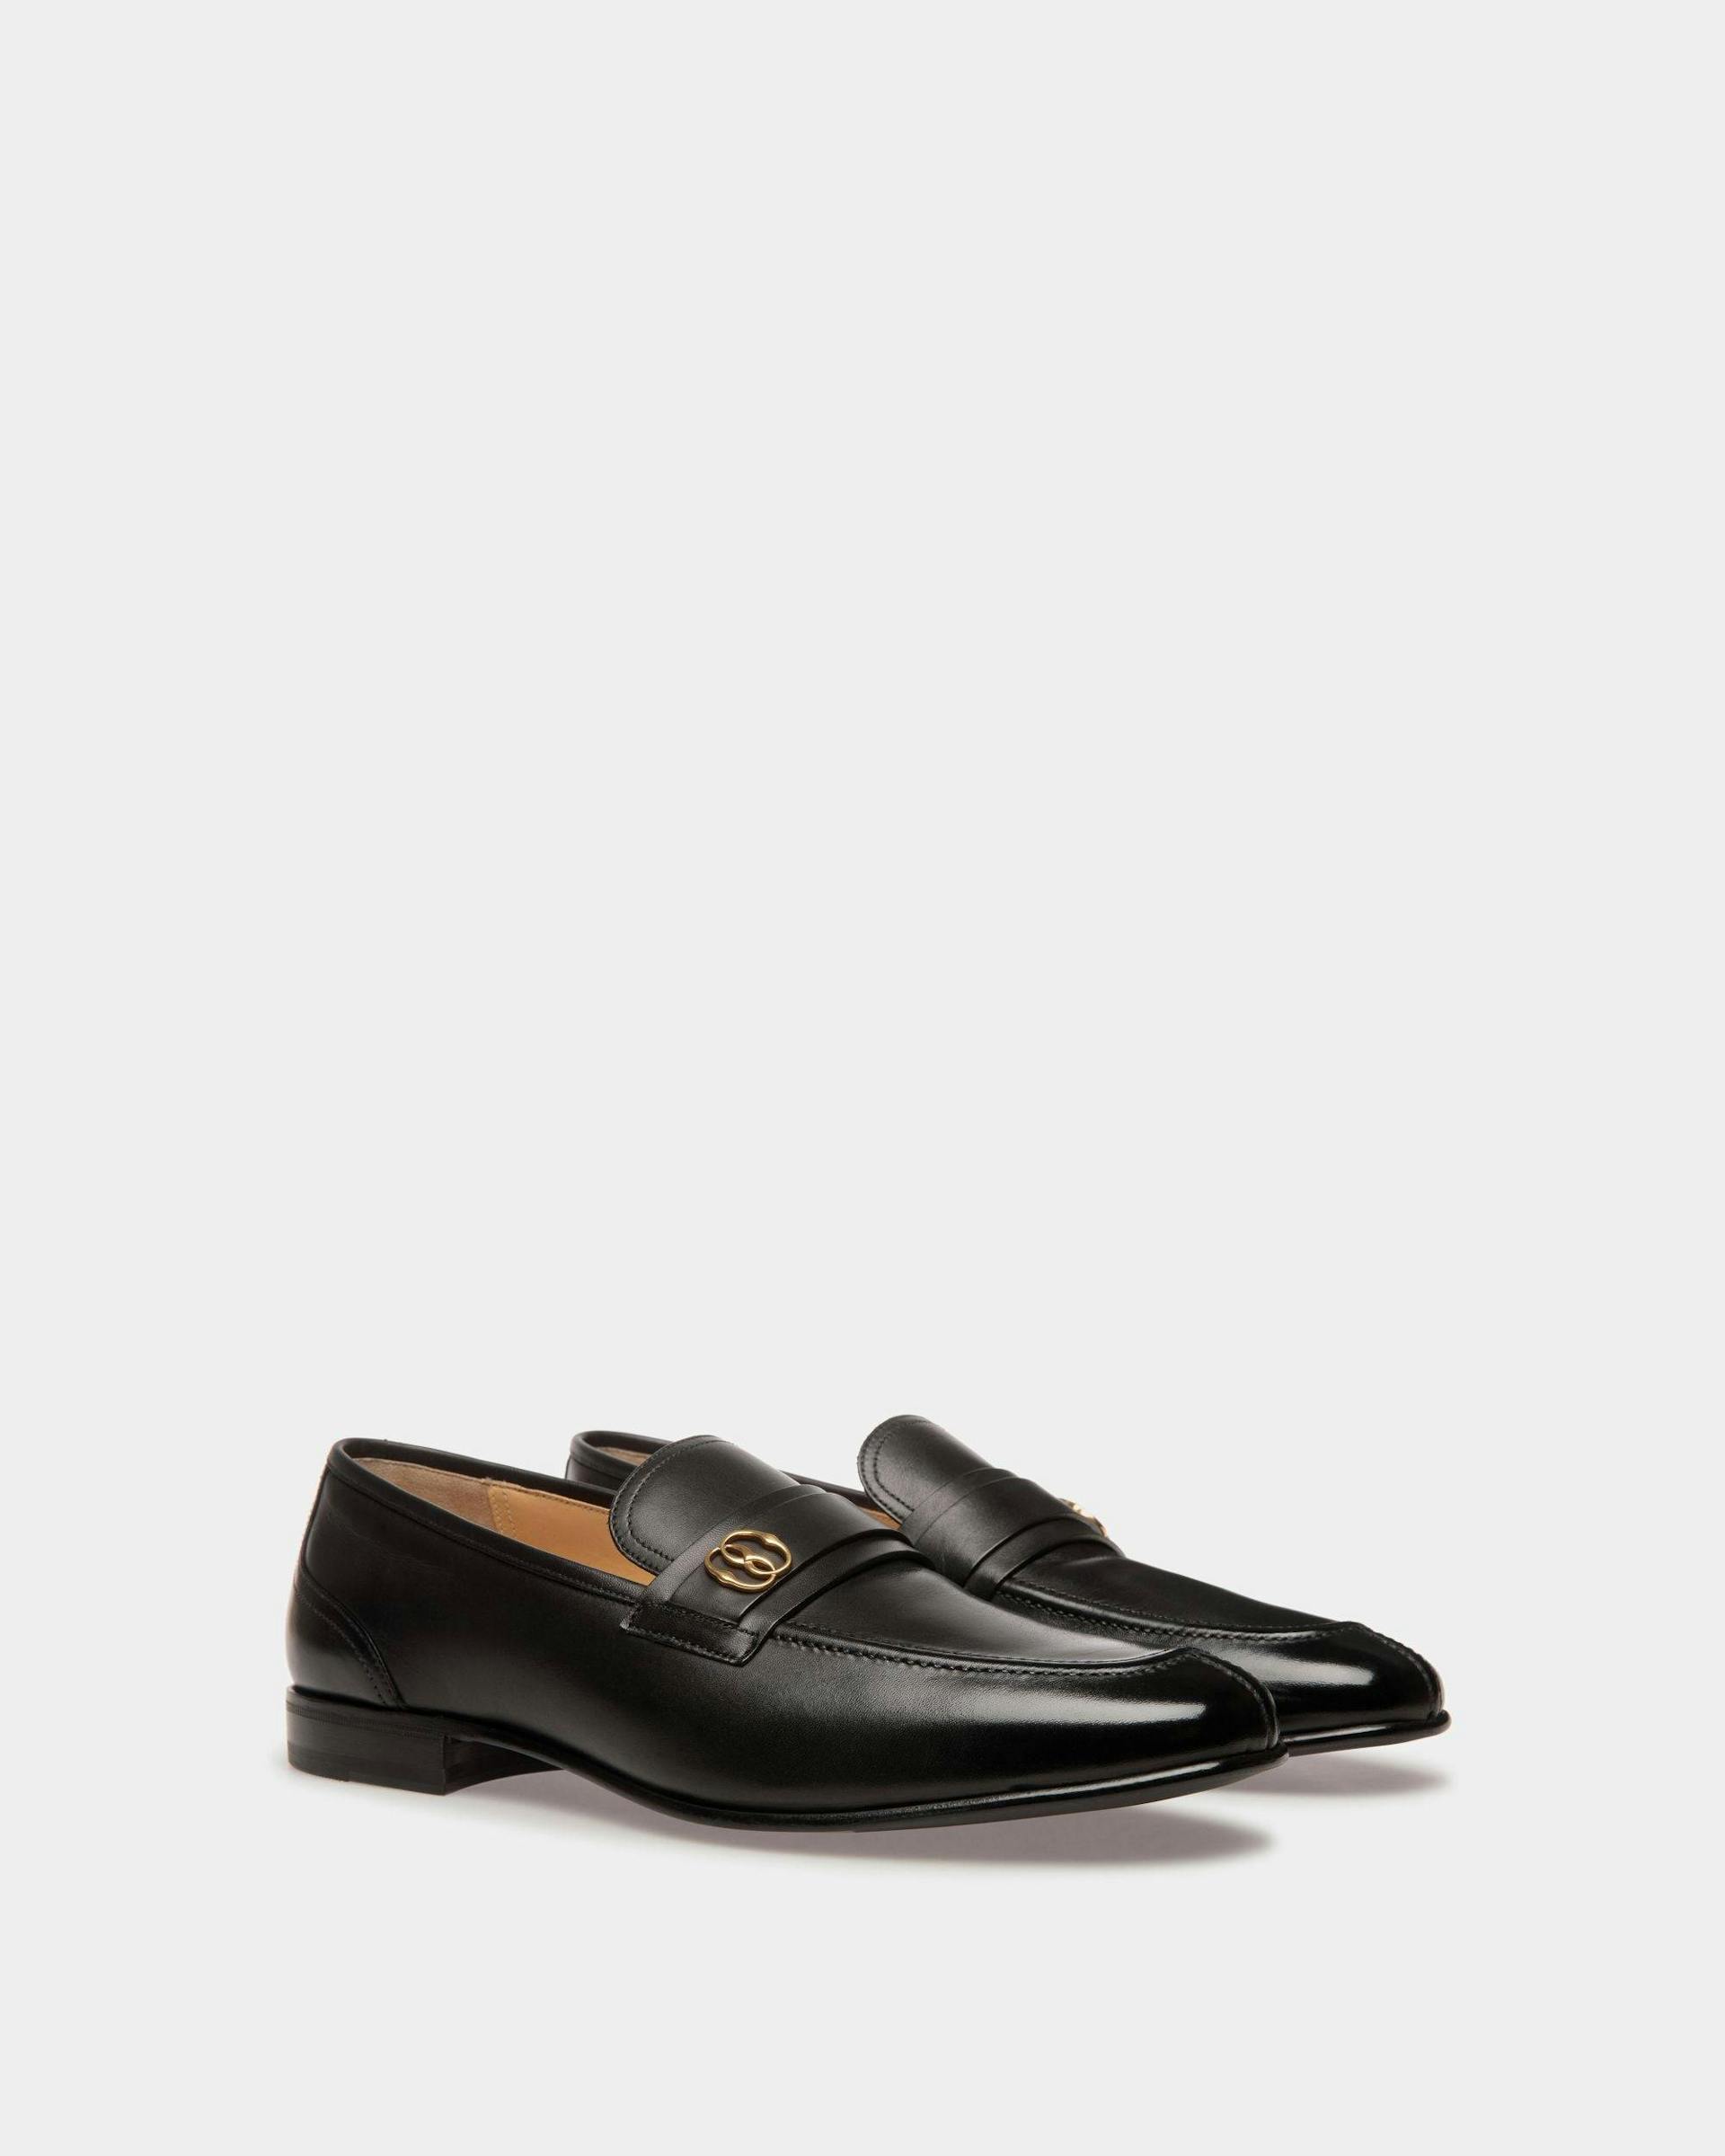 Men's Suisse Loafers In Black Leather | Bally | Still Life 3/4 Front